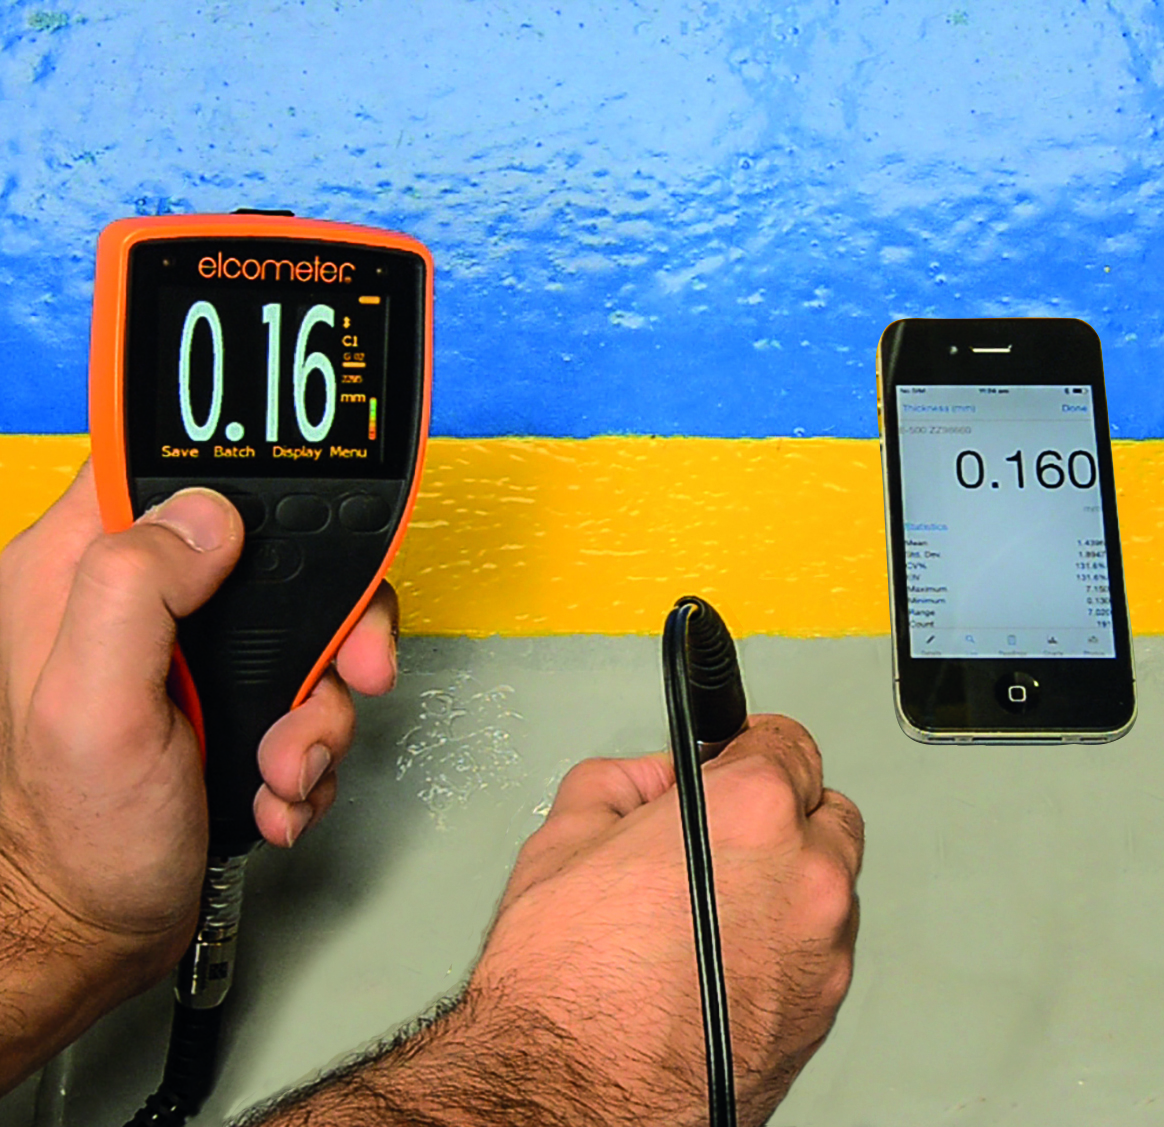 BAMR introduces new Elcometer 500 Concrete Coating Thickness Gauge